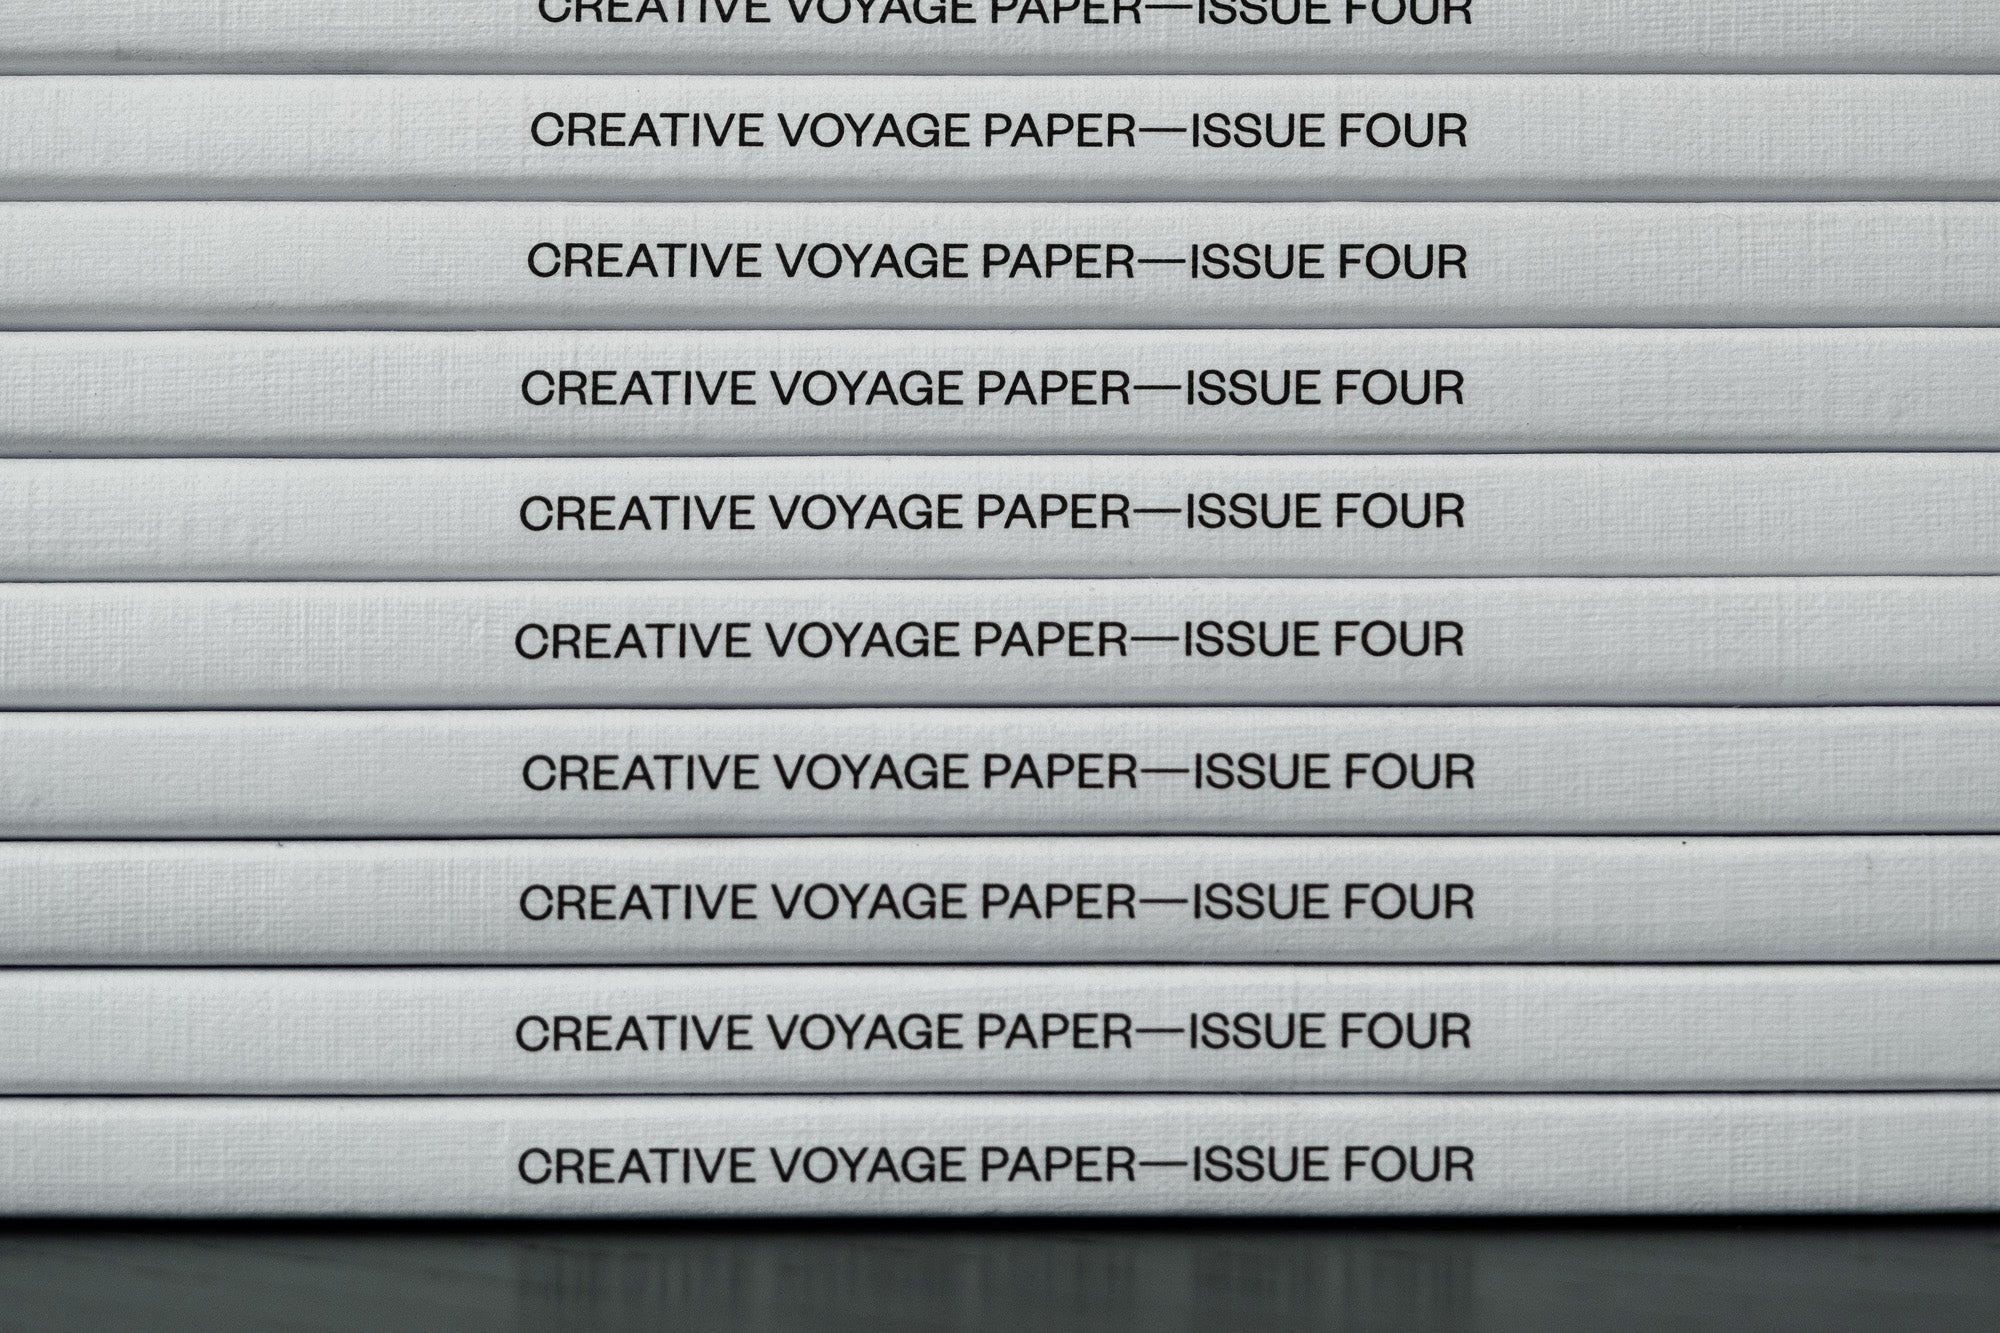 Creative Voyage Paper, Issue Four